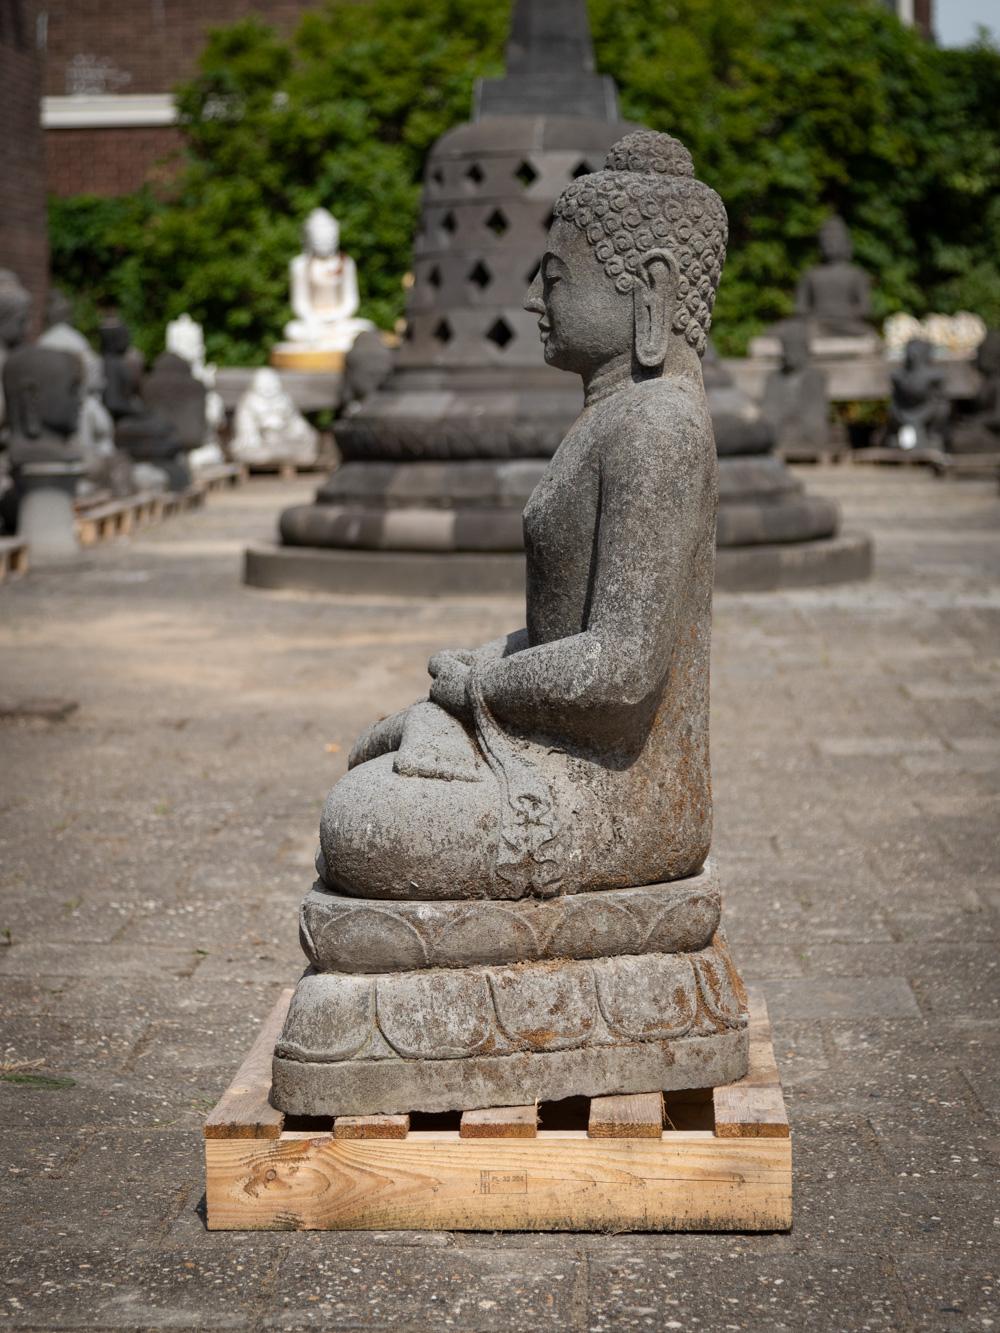 Indonesian Middle 20th century oll lavastone Buddha statue in Dhyana Mudra from Indonesia